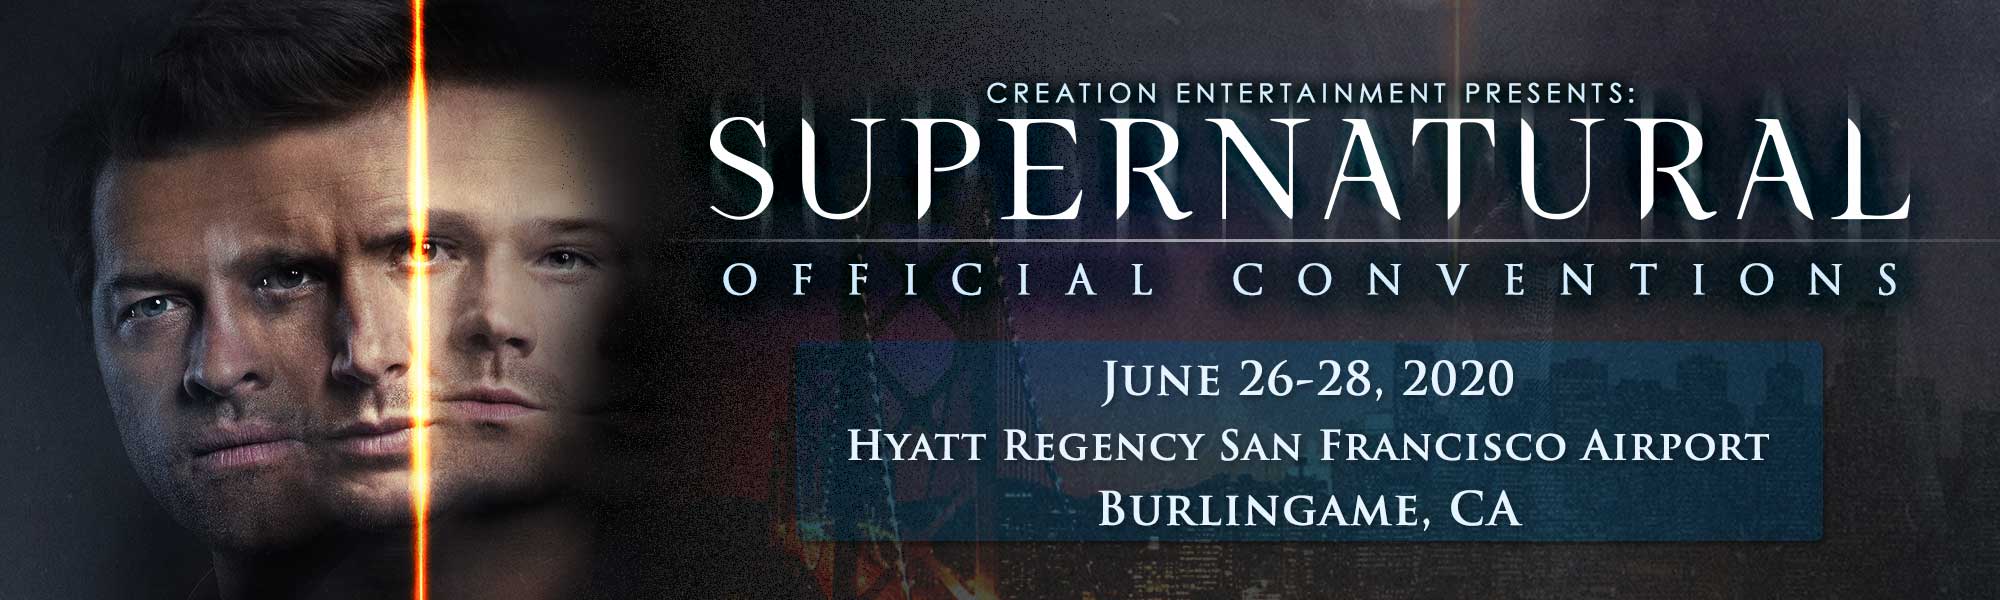 Creation Entertainment S Supernatural Offical Convention In